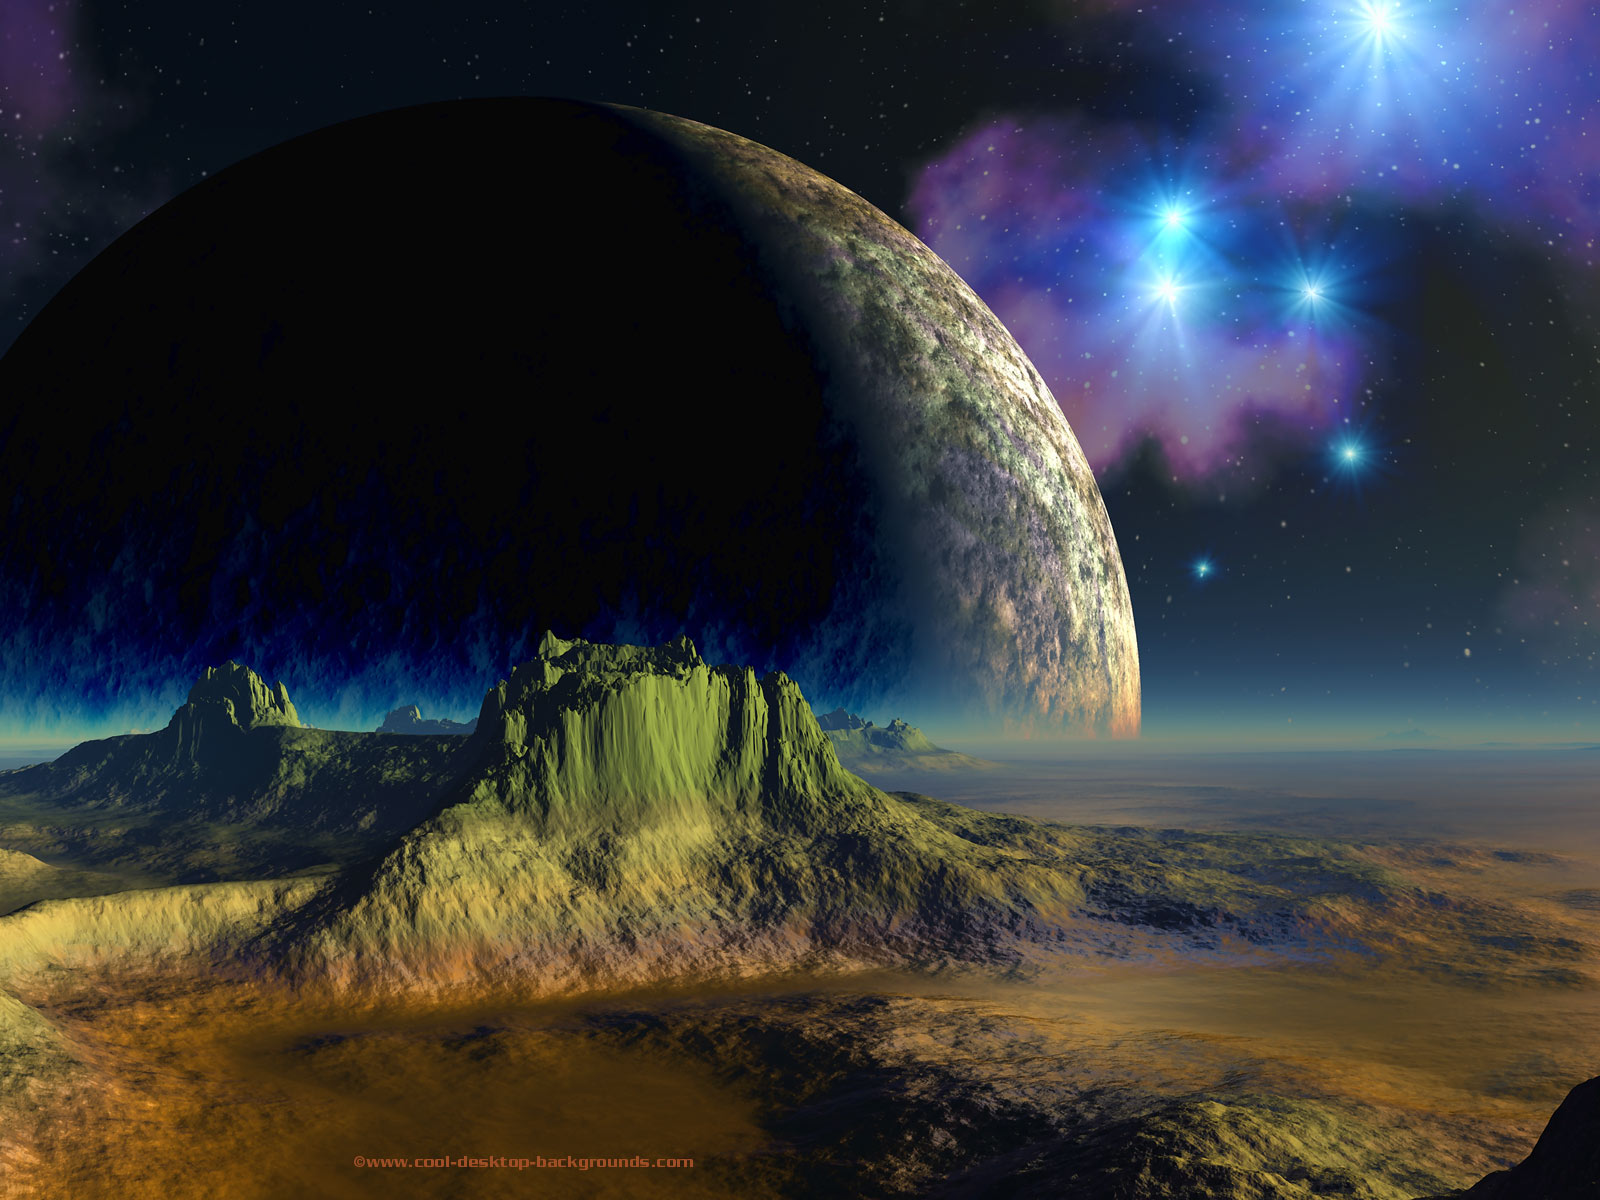 Moon Setting On An Alien World To Use As A Desktop Background